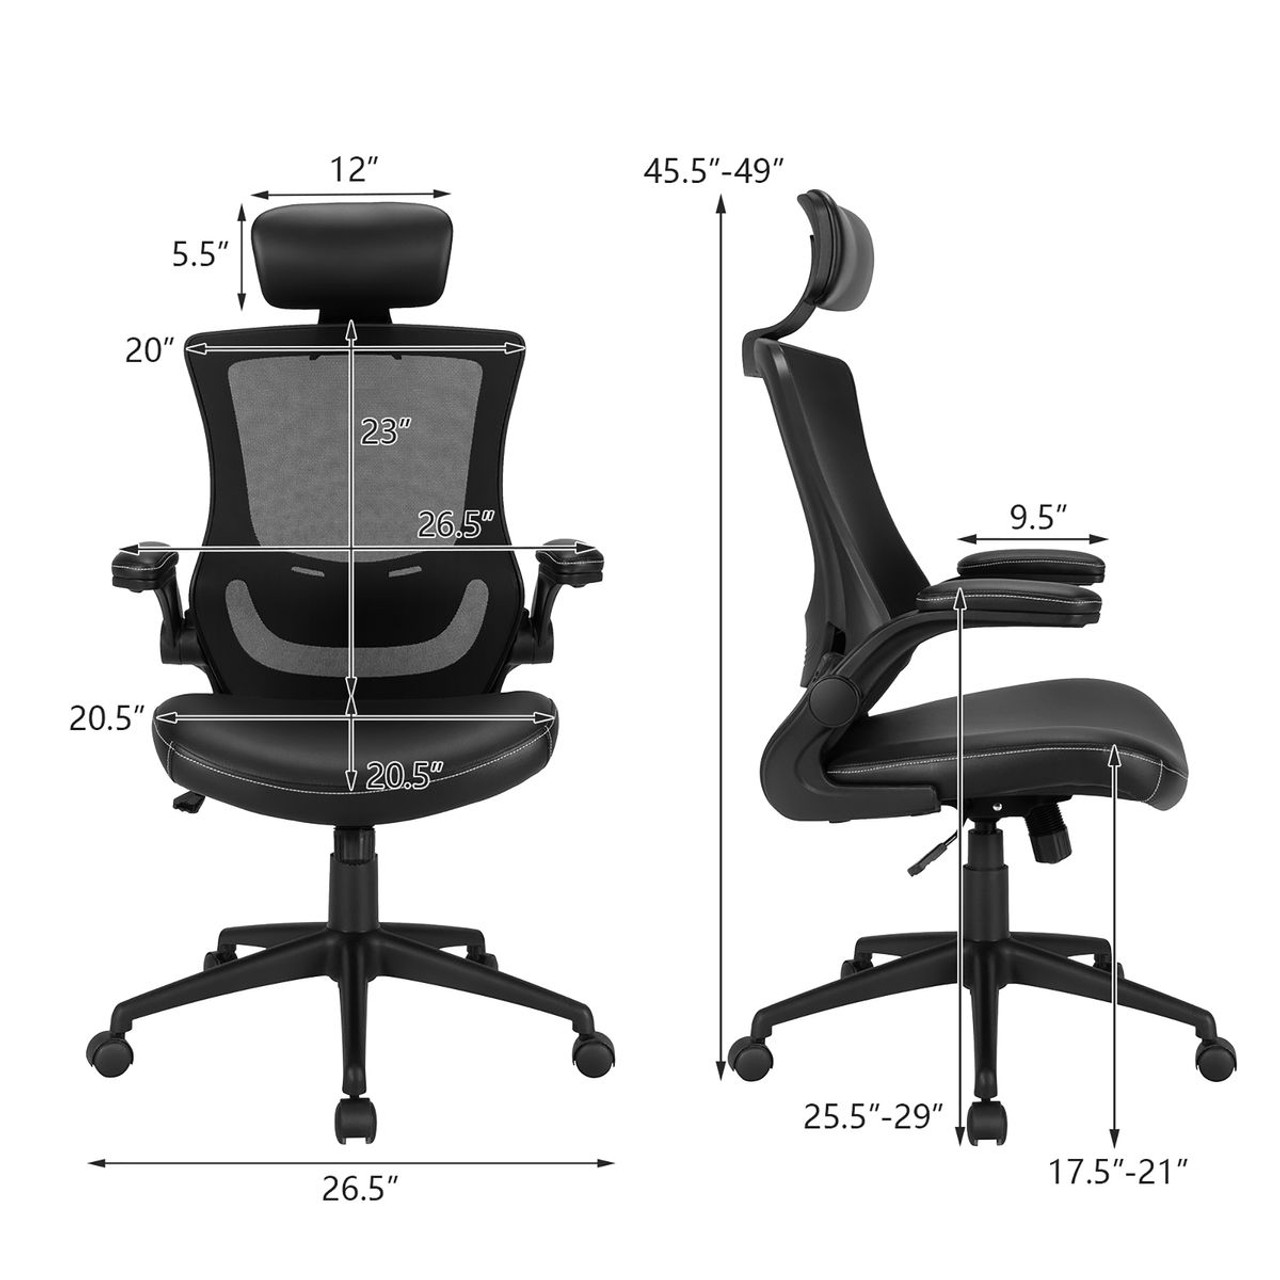 Mesh Swivel Office Chair with Flip-up Arms and Leather Seat product image